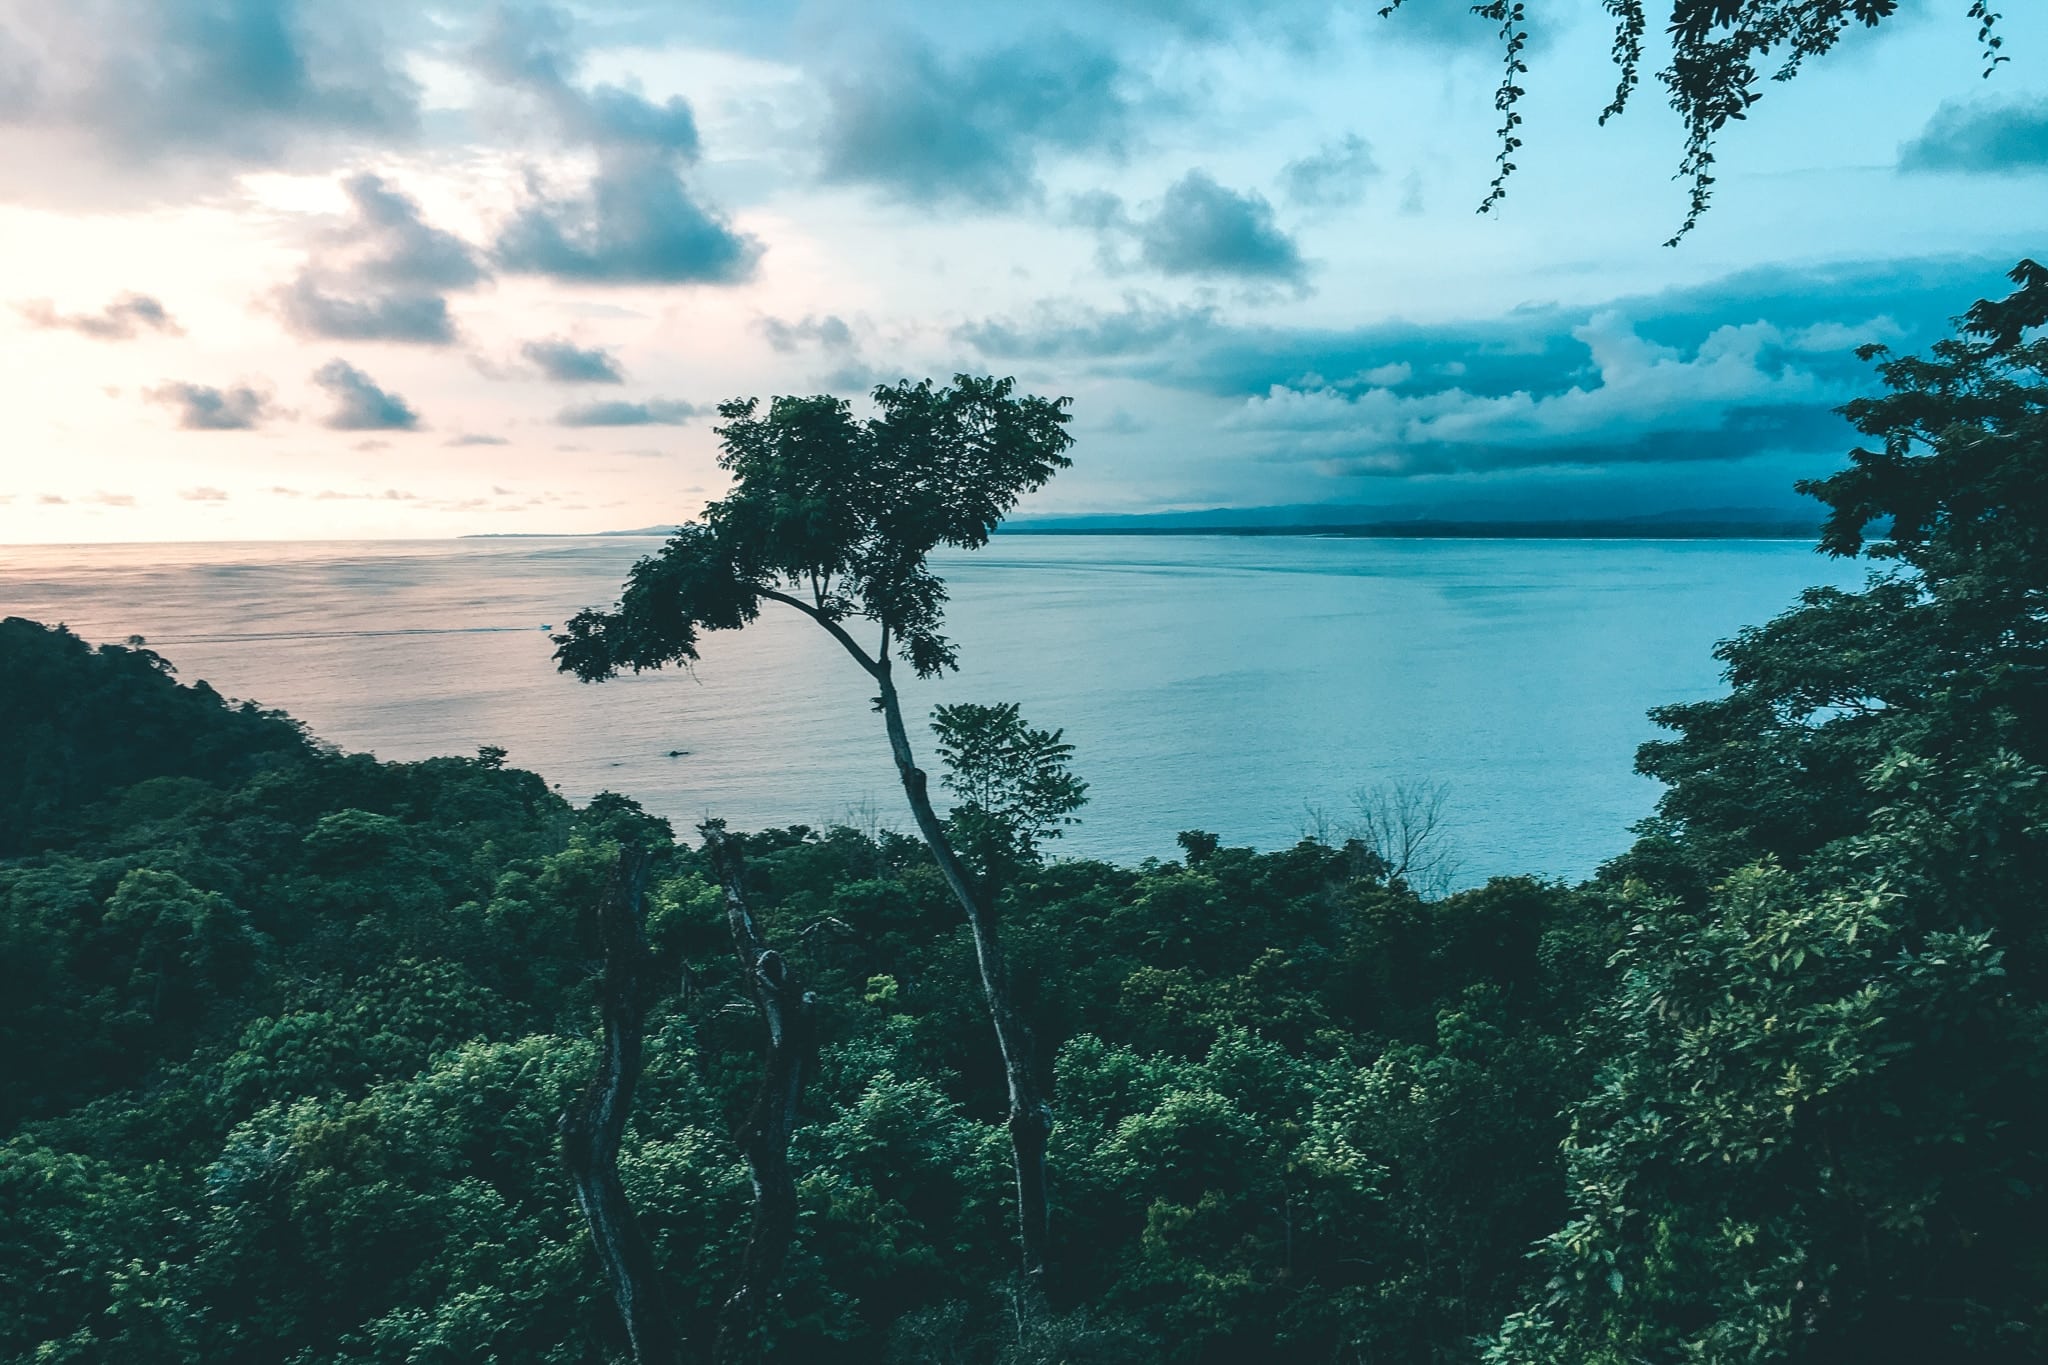 View of the jungle going out to the ocean during sunset, one tree sticking out above the rest